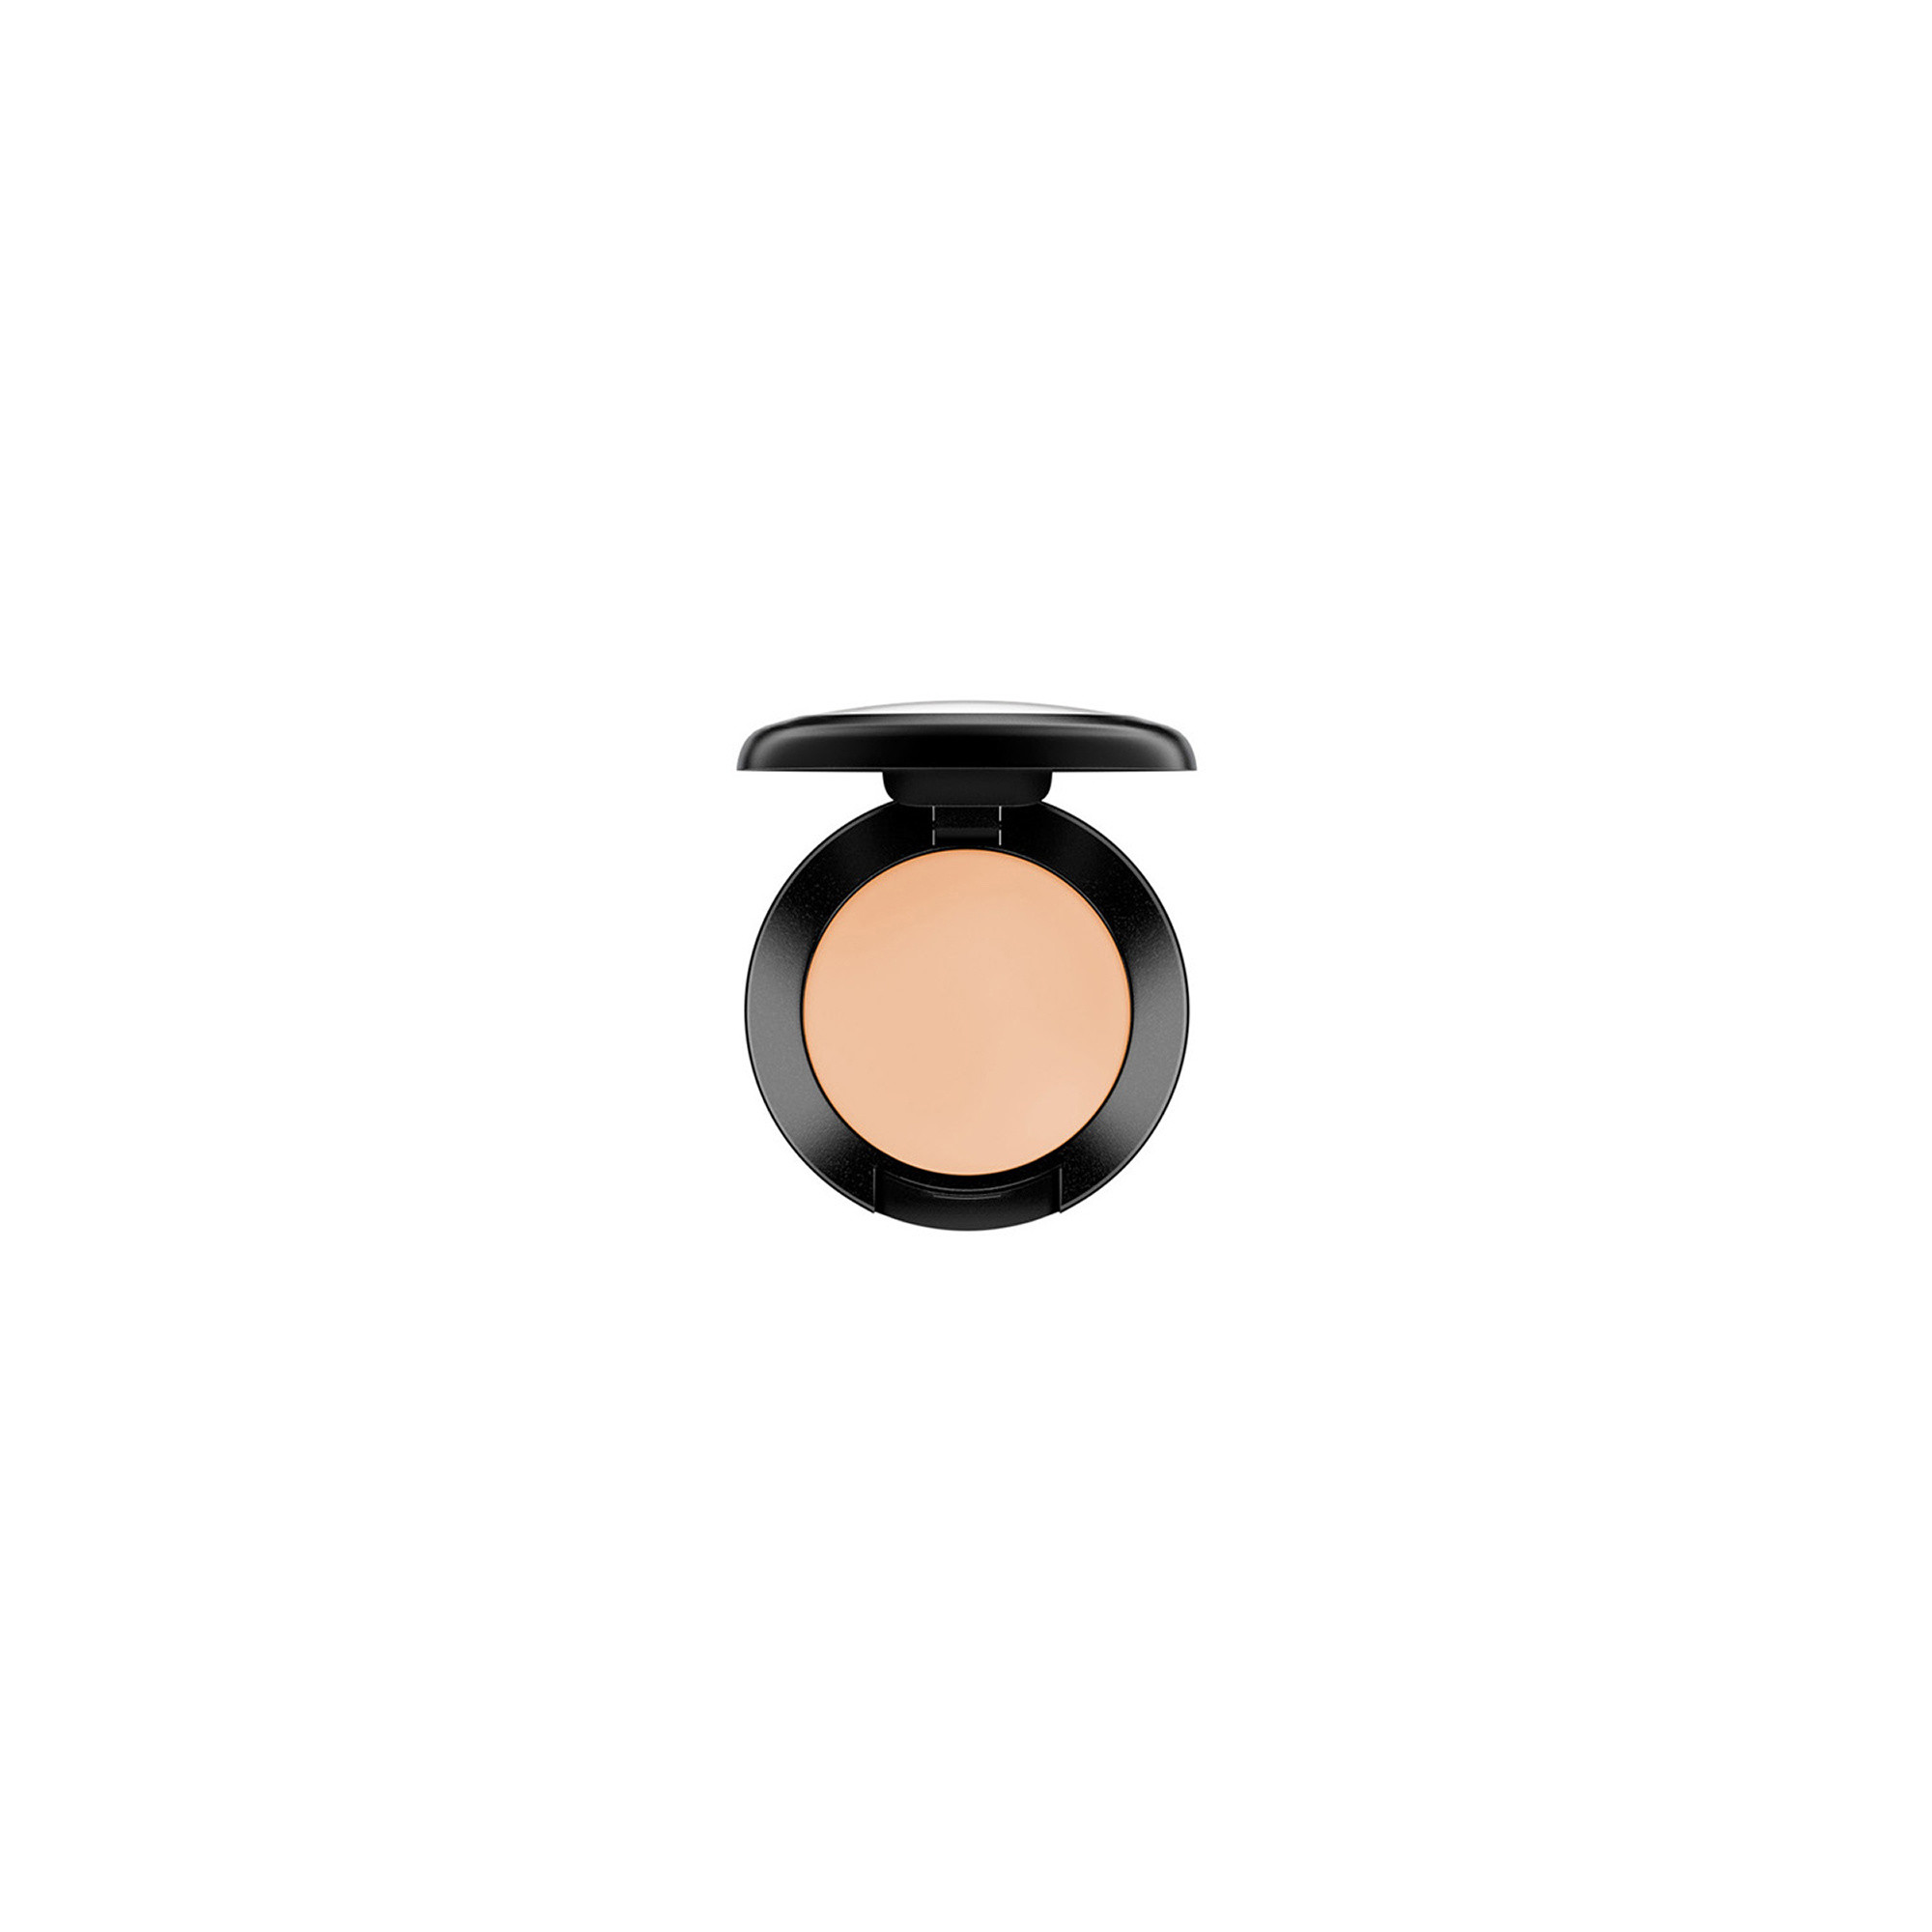 Studio Finish Concealer - NW25, NW25, large image number 0